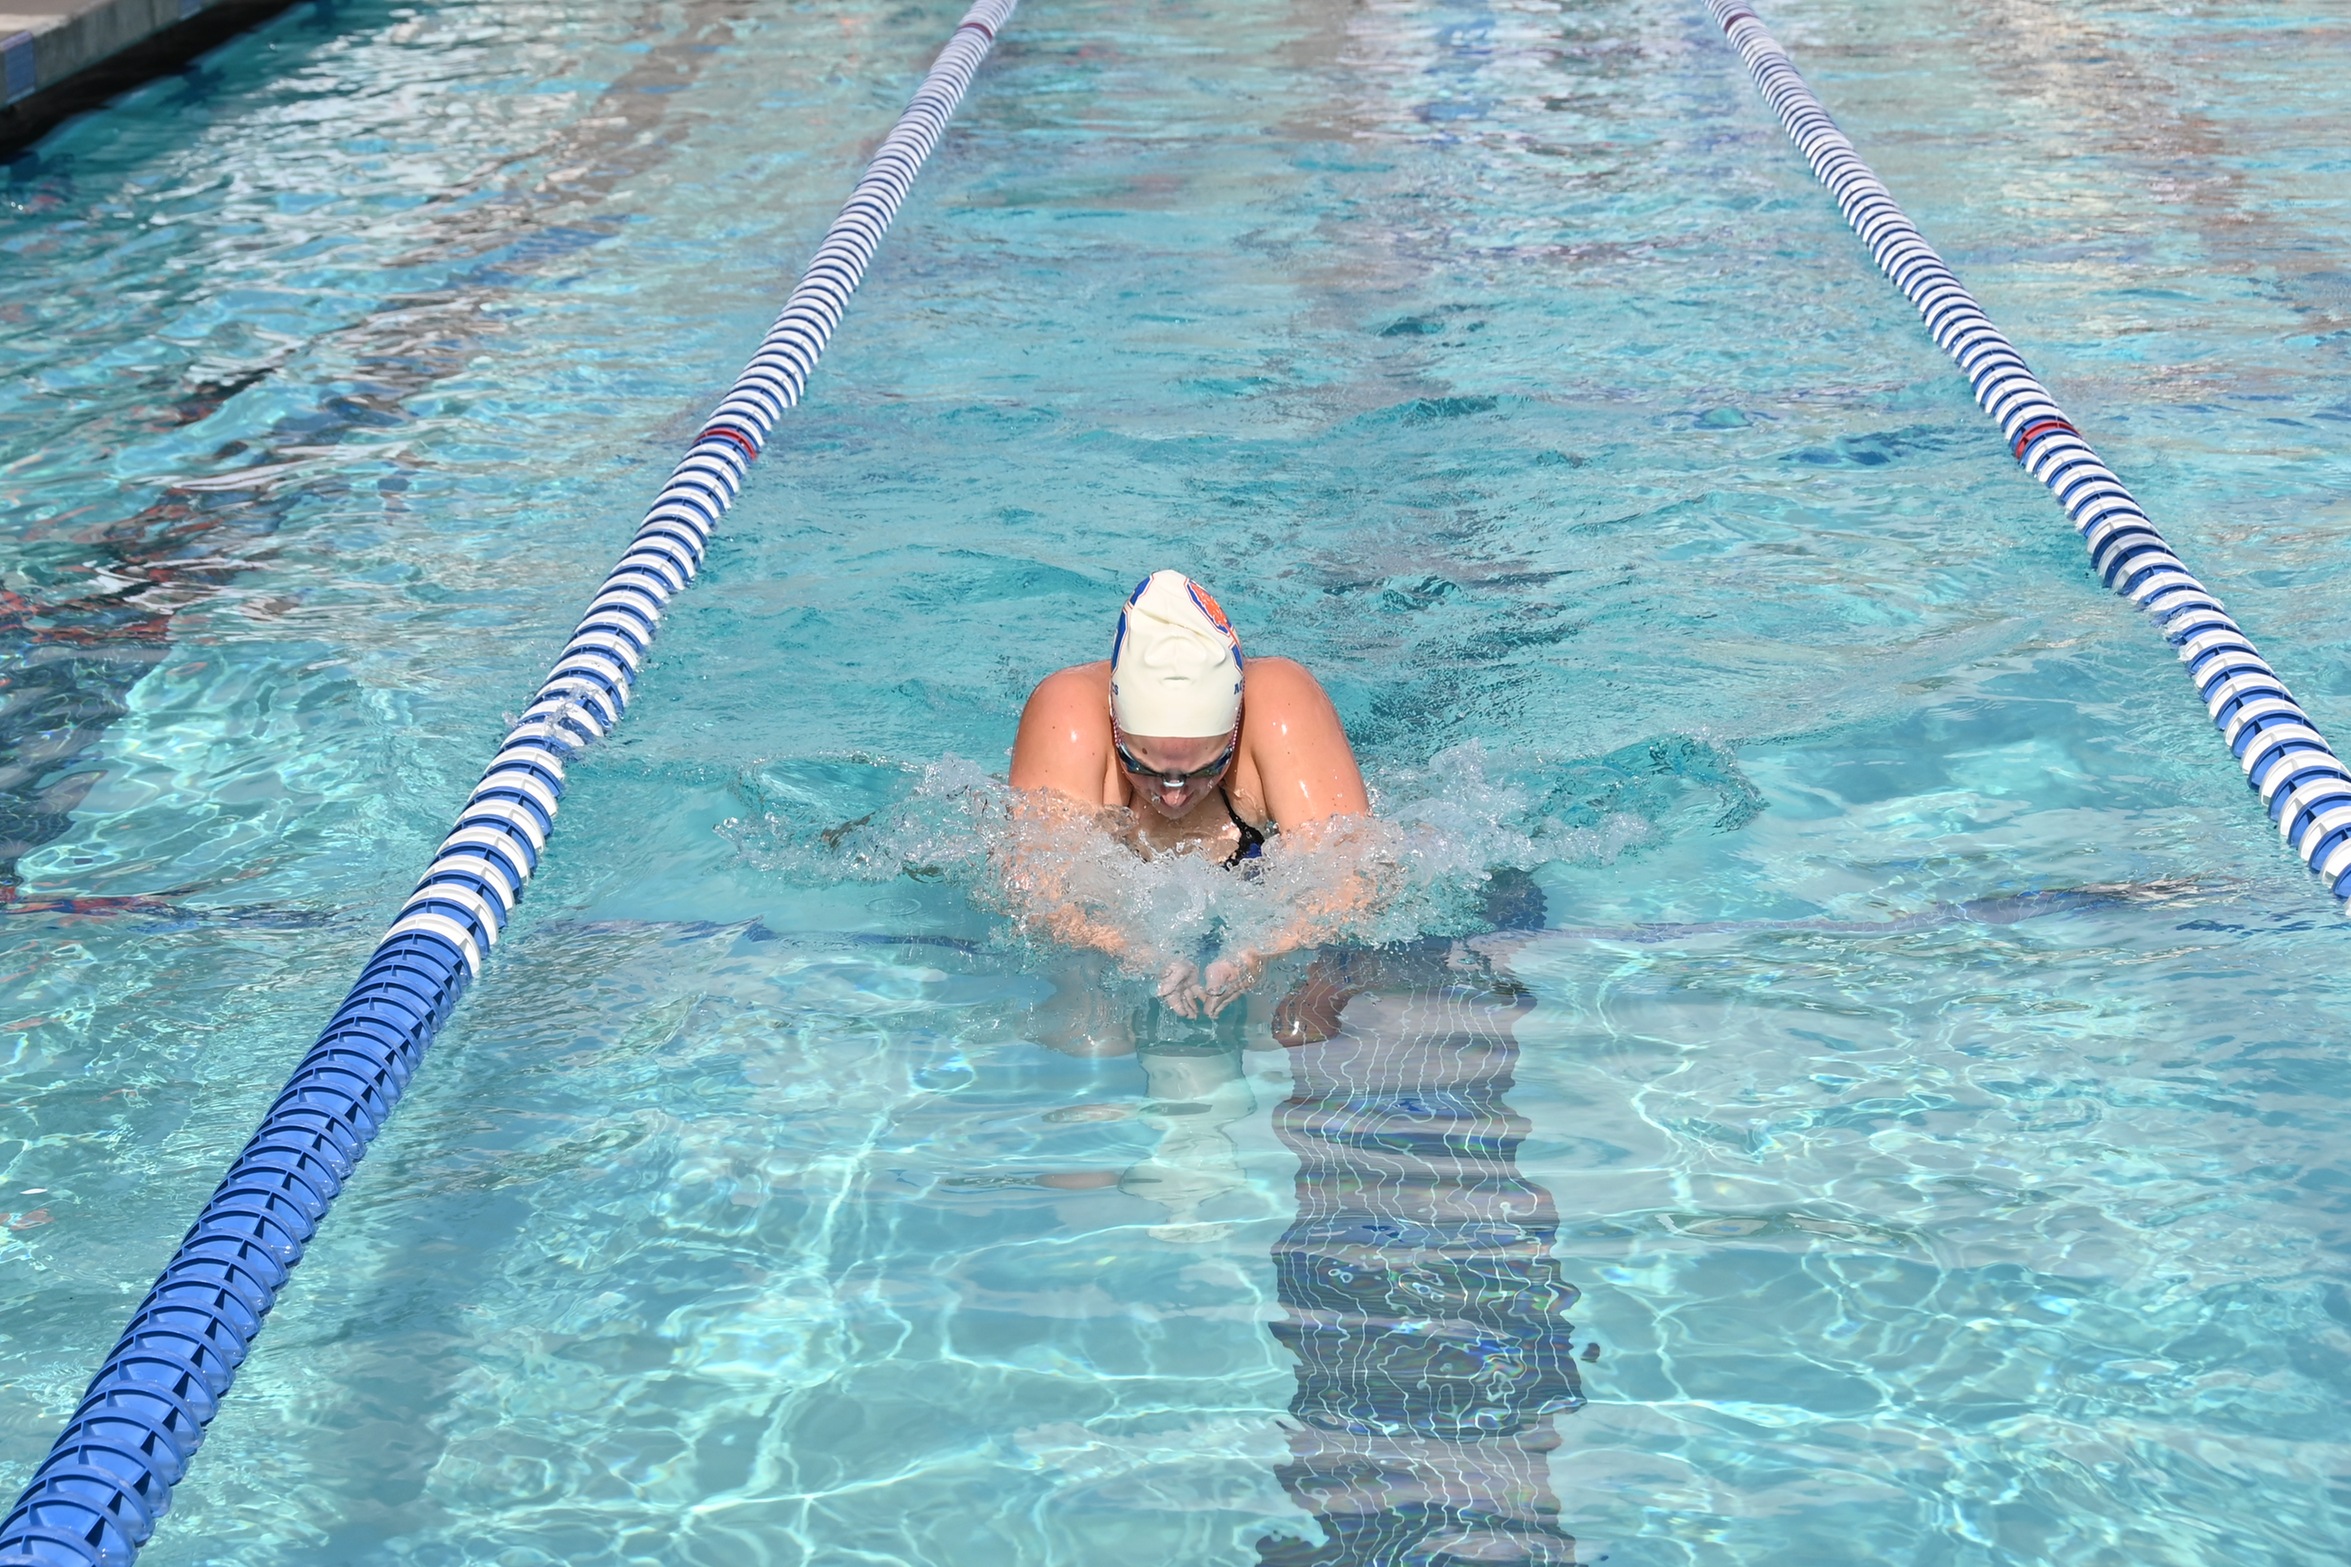 College of the Sequoias' Alexandria Bower in a home meet on February 15, 2024.

Credit: Norma Foster / COS Athletics